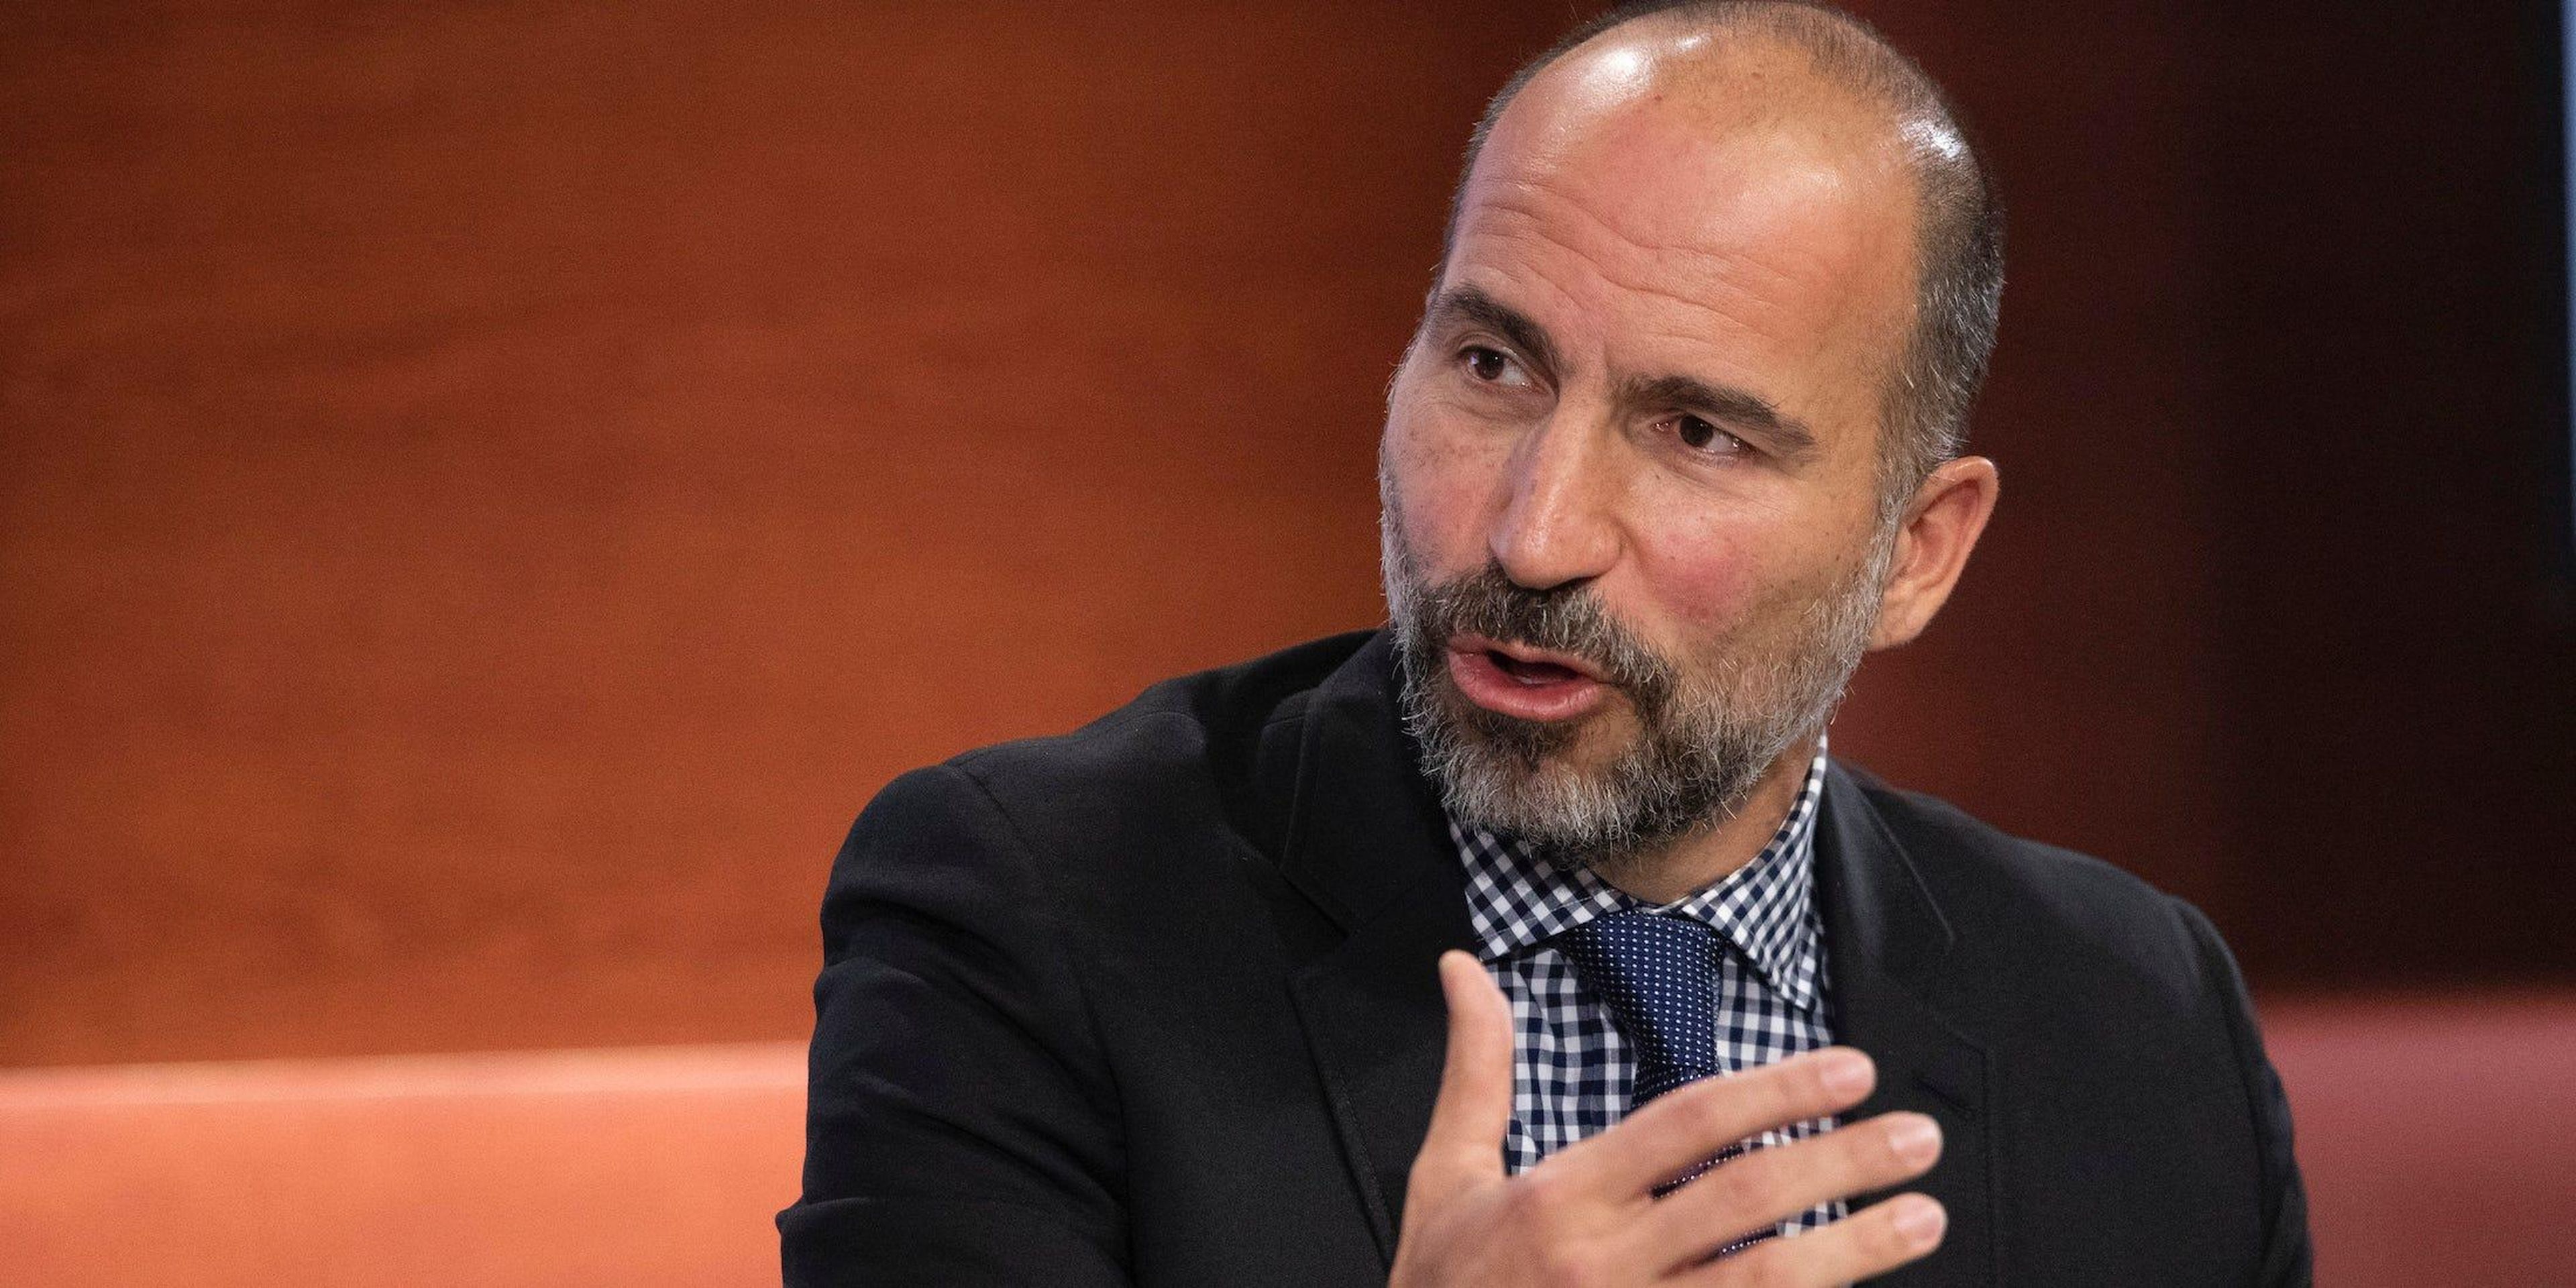 Dara Khosrowshahi, CEO of Uber, speaks at the Bloomberg Global Business Forum, on Wednesday, Sept. 25, 2019 in New York.